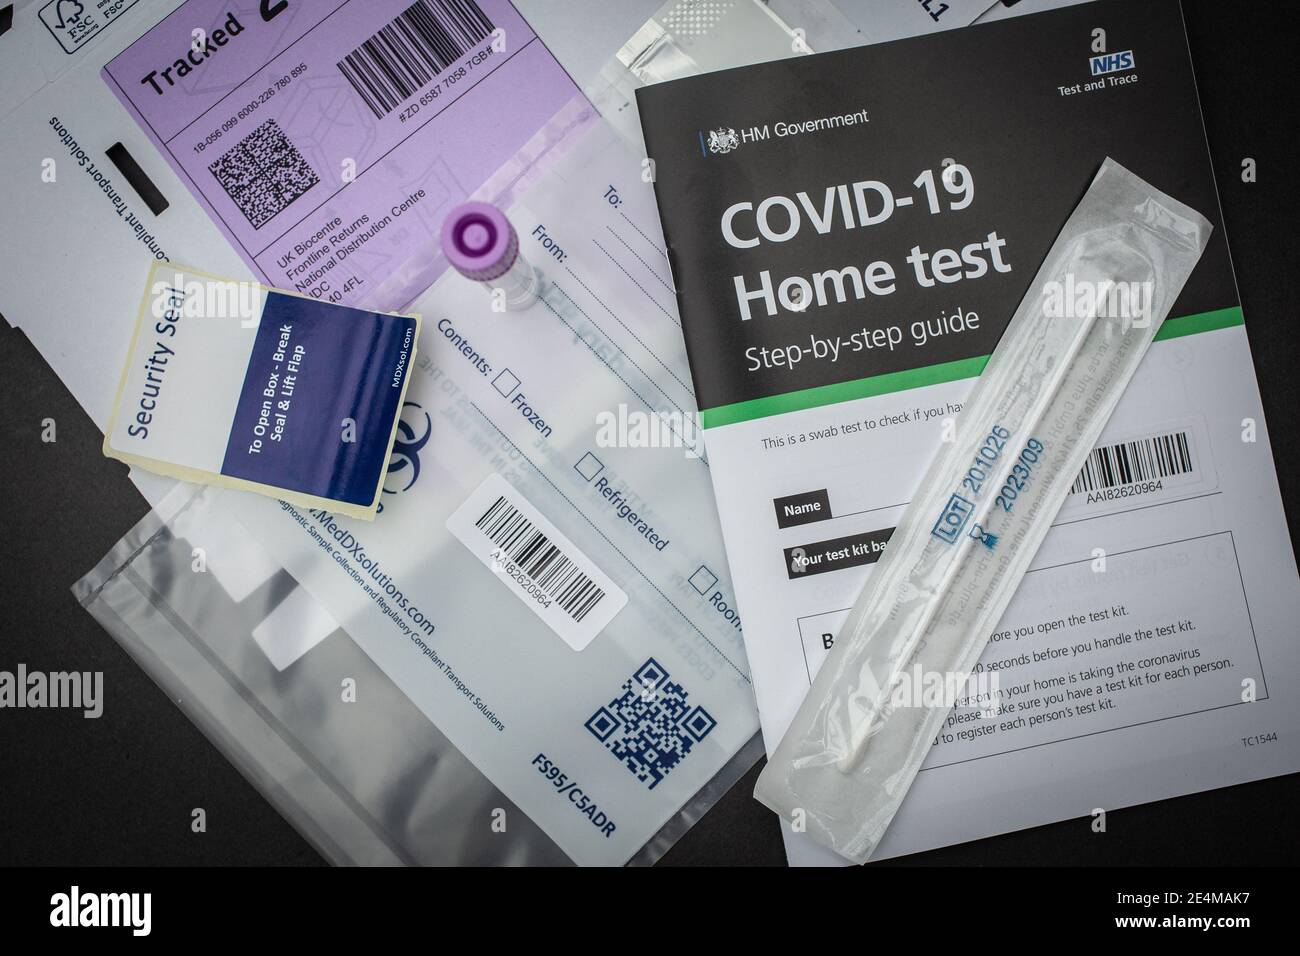 COVID-19 Home Test swab test kit with step by step guide Stock Photo